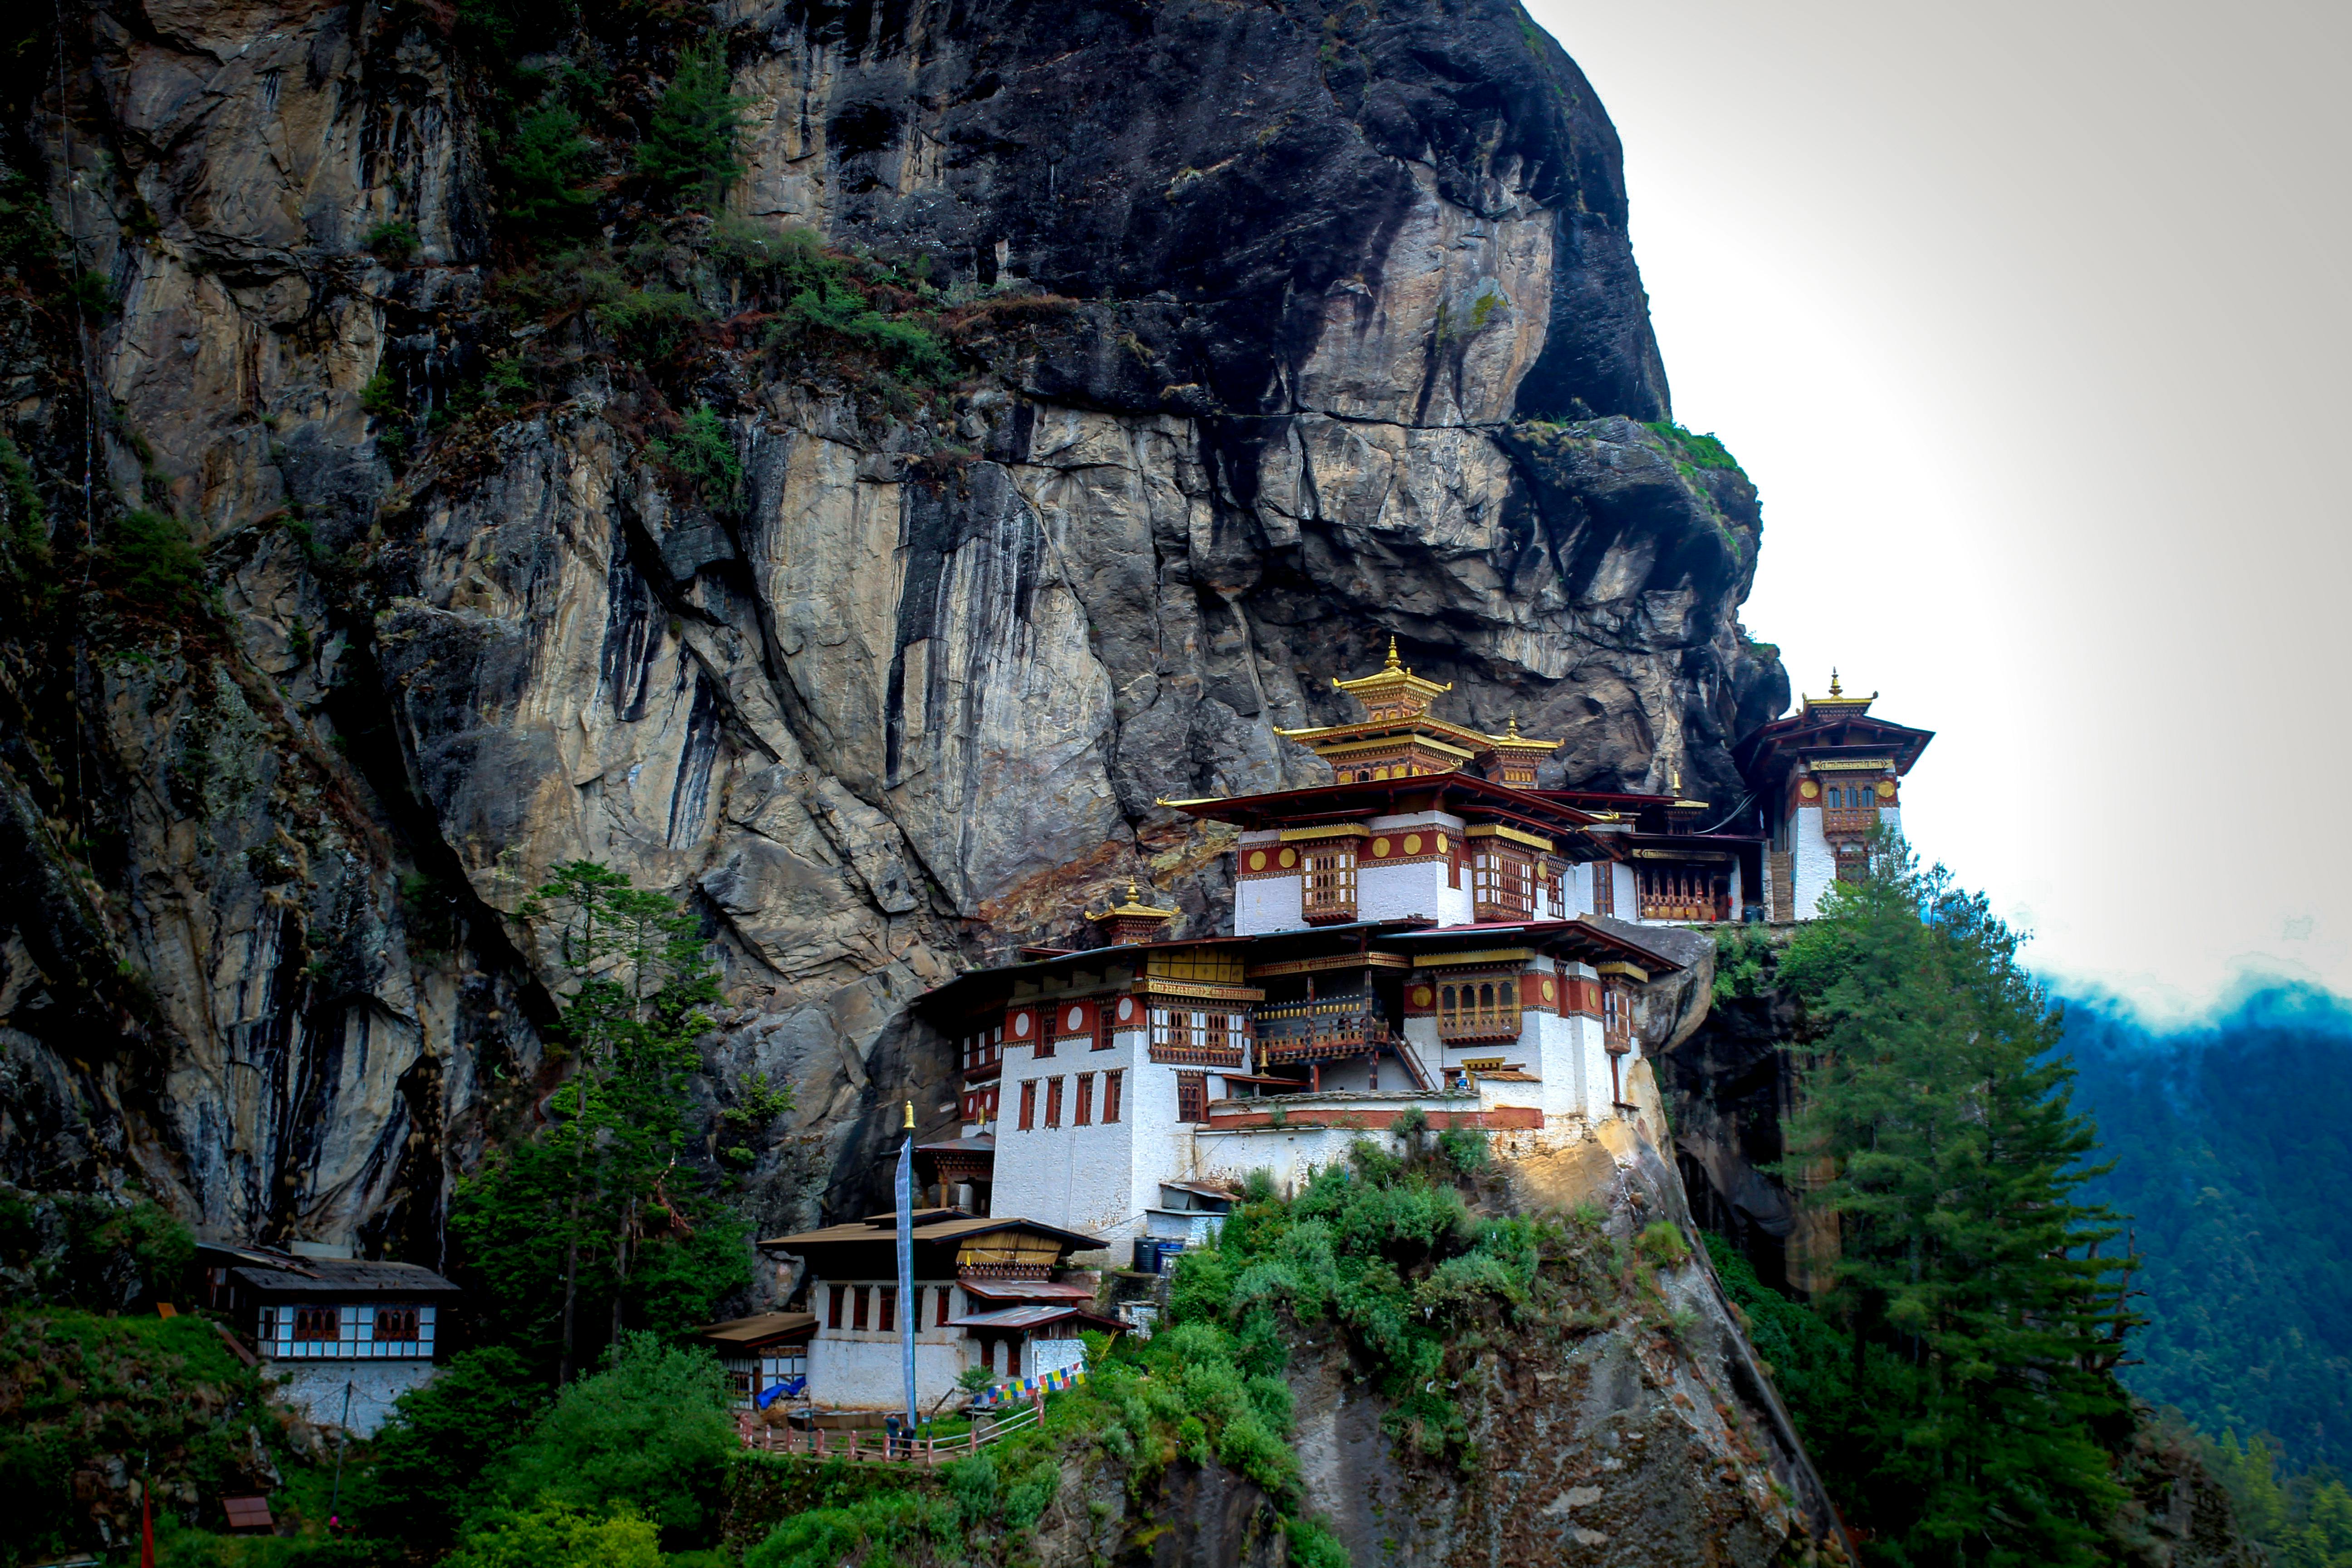 Bhutan Adventure: Hiking with Myths & Finding Happiness